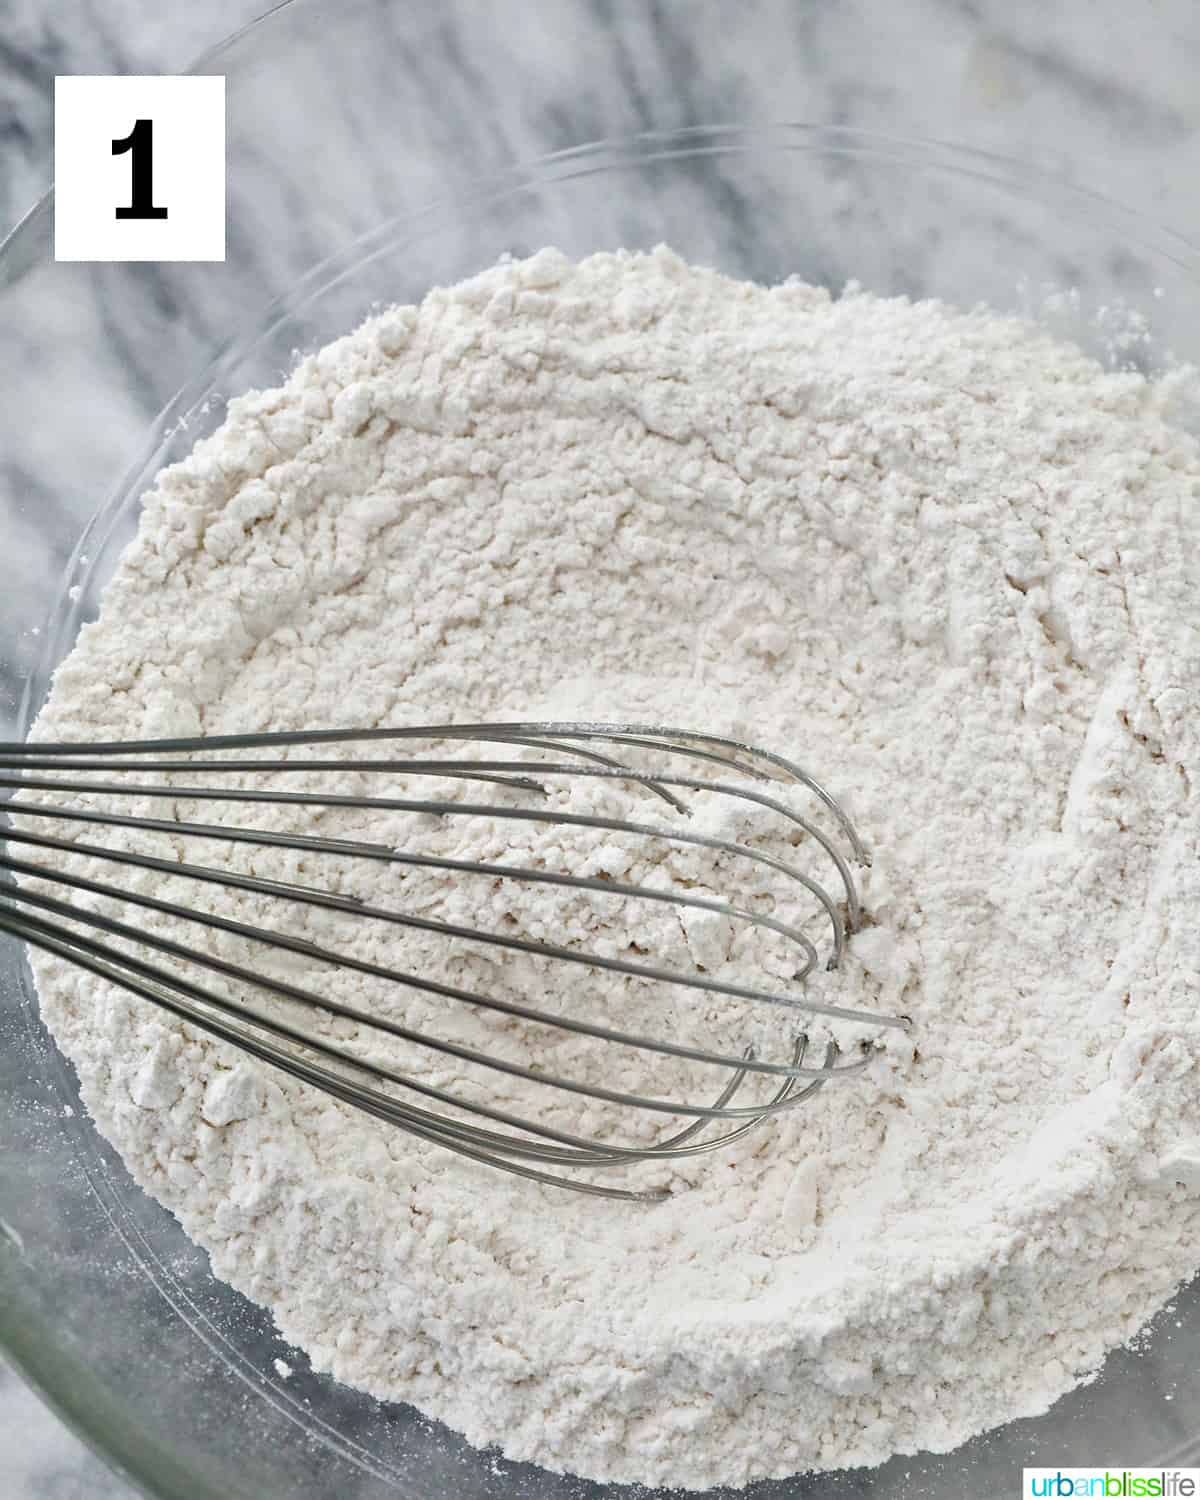 whisking flour and other dry ingredients in a mixing bowl.